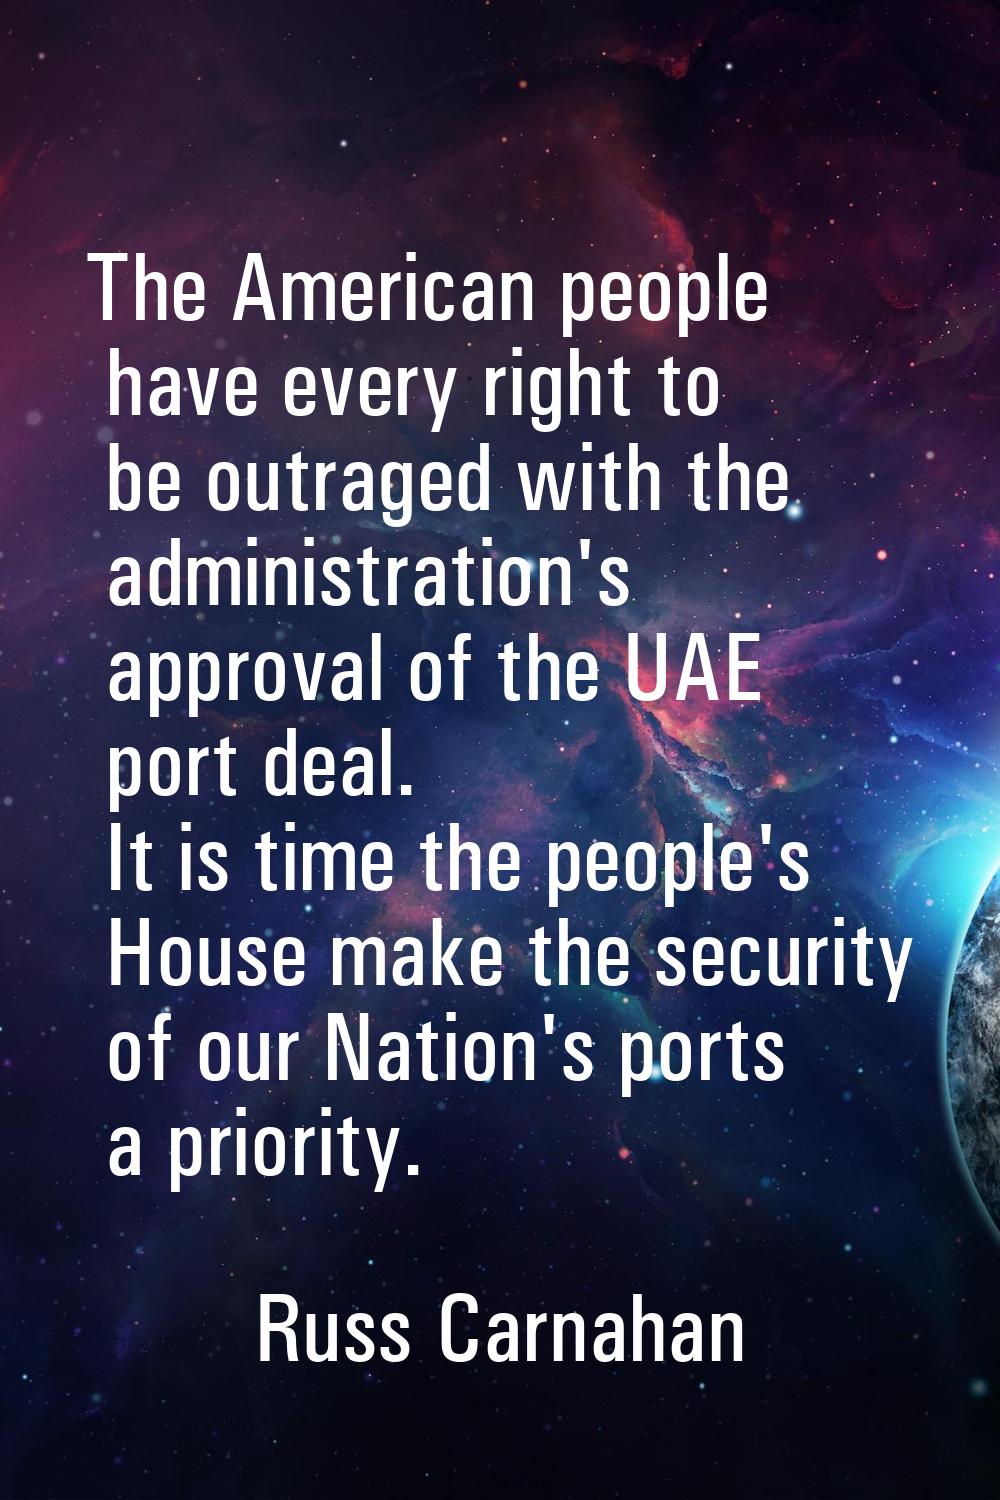 The American people have every right to be outraged with the administration's approval of the UAE p